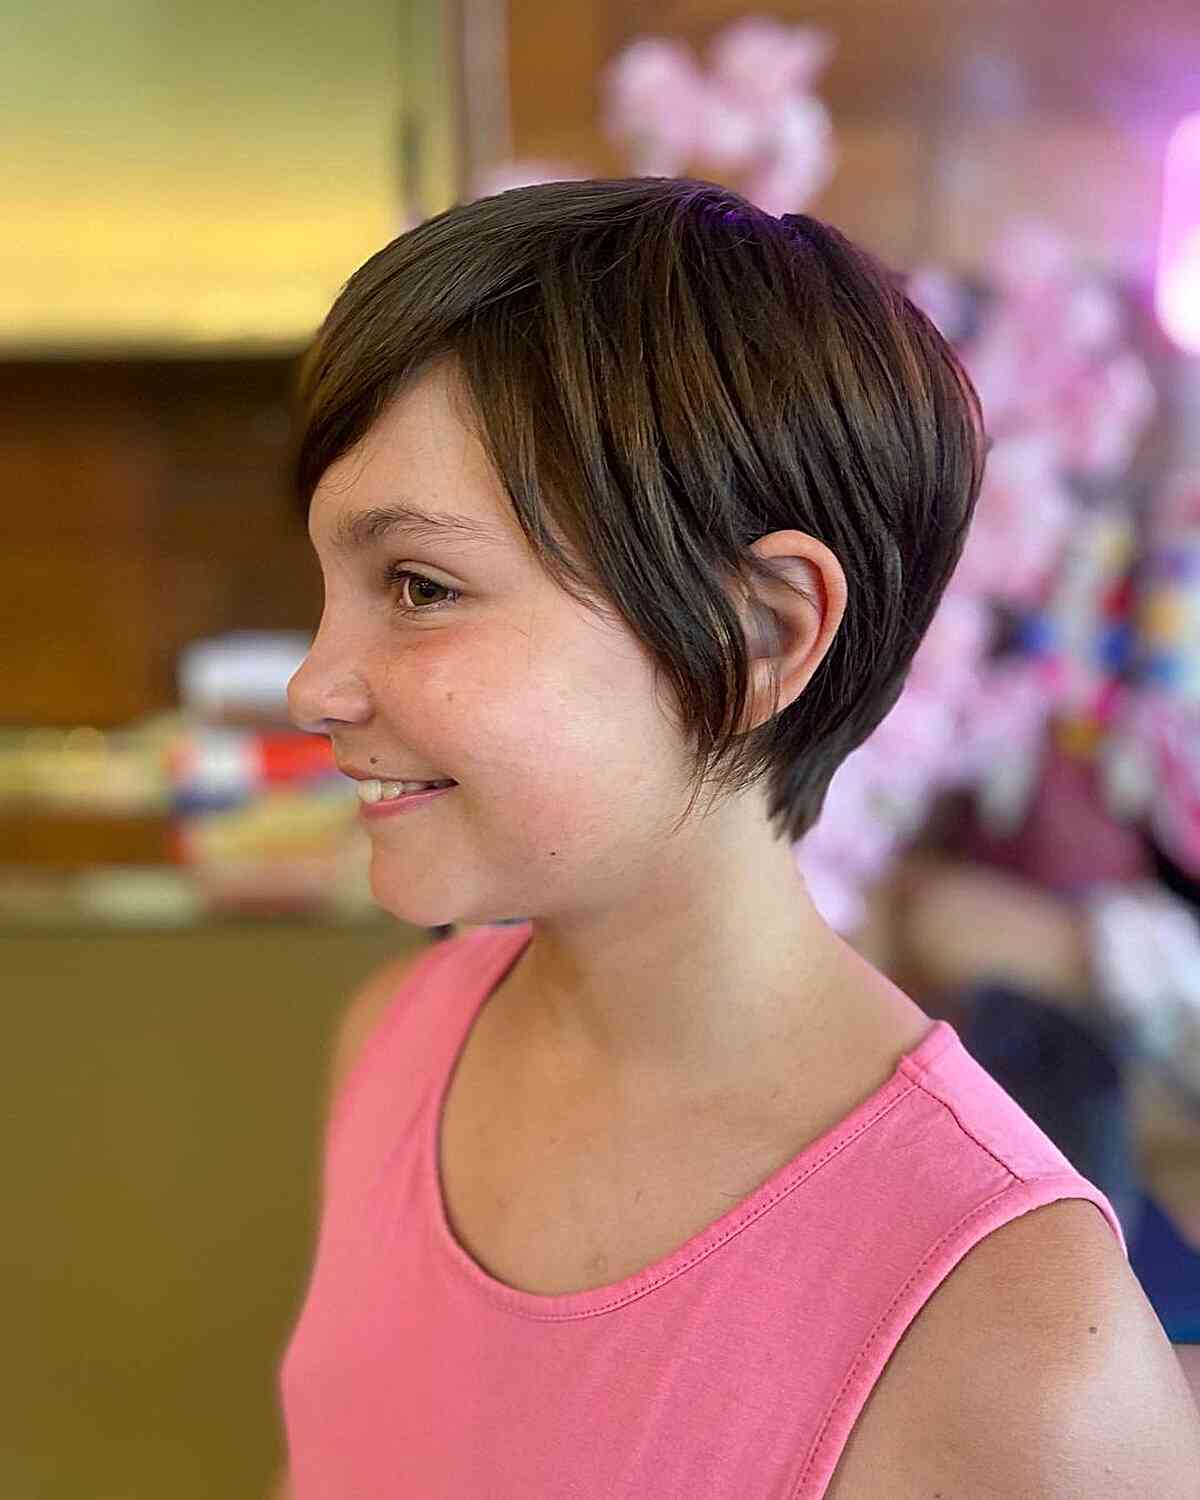 Download Hairstyles for short hair Girl App Free on PC (Emulator) - LDPlayer